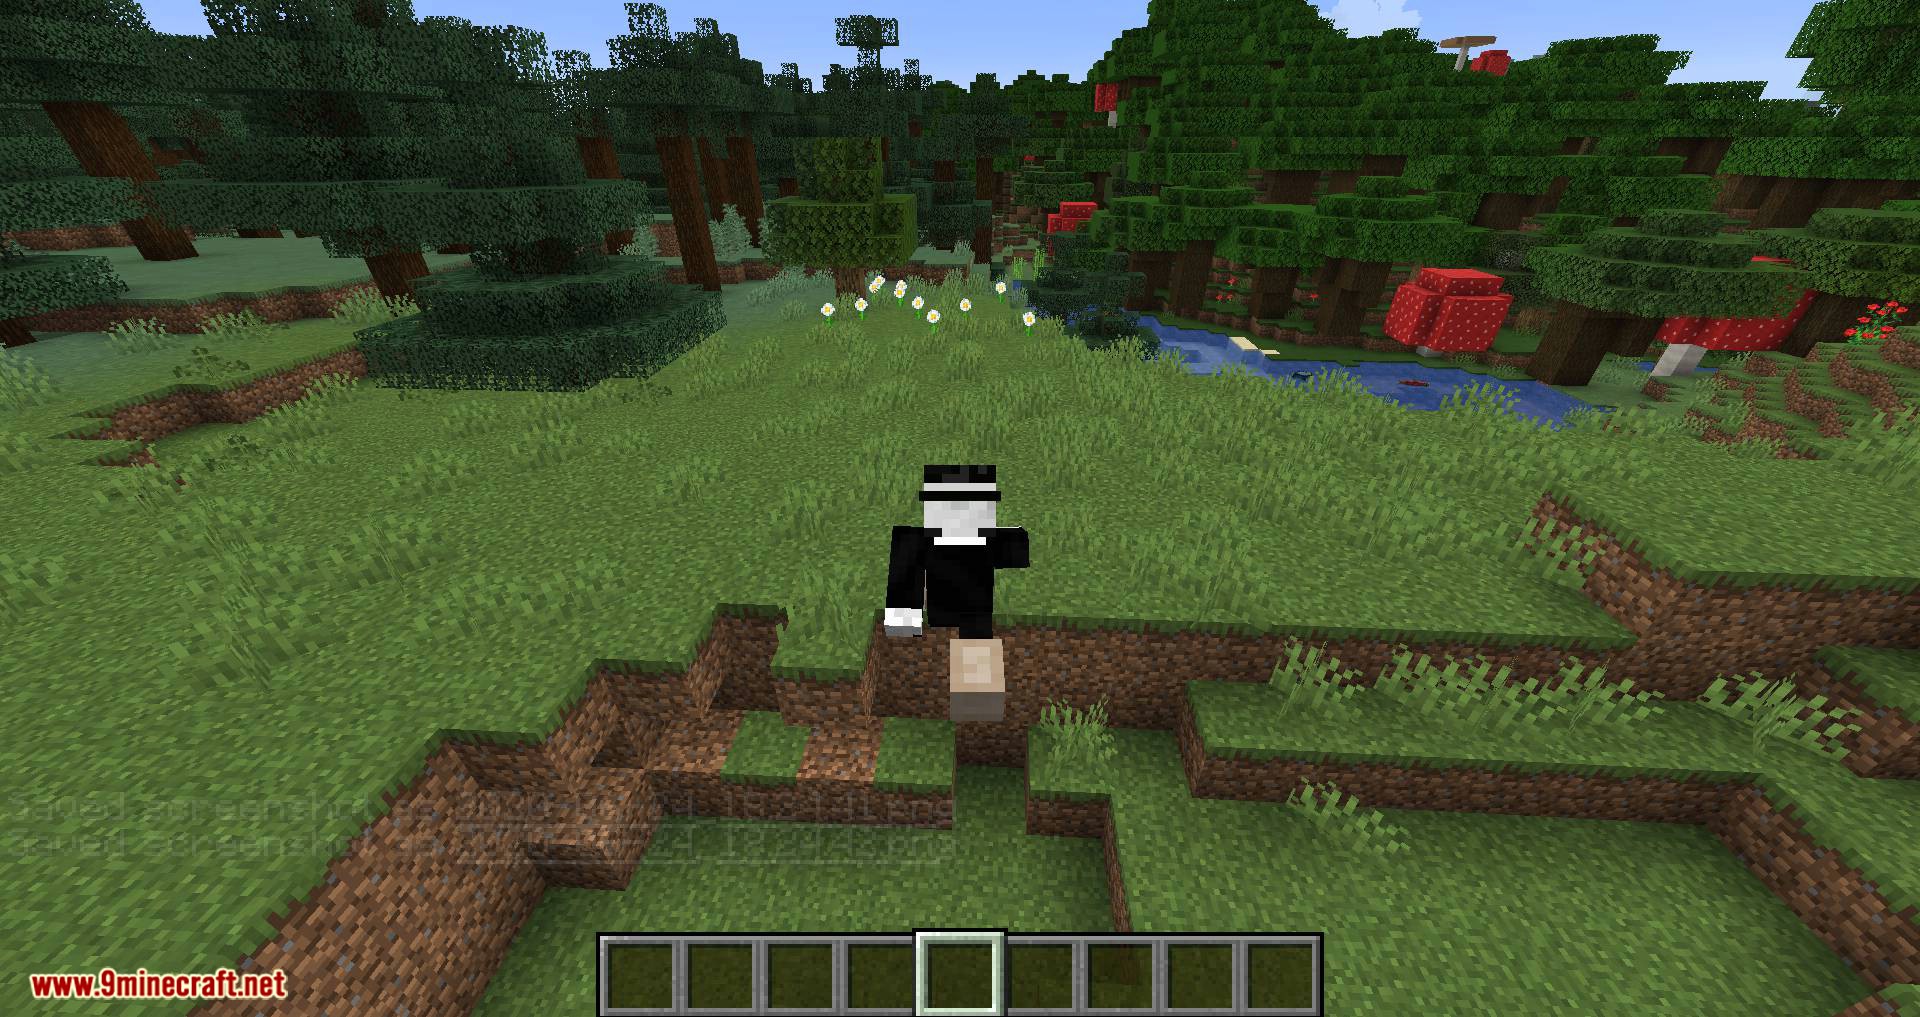 Bunny Boots mod for minecraft 05